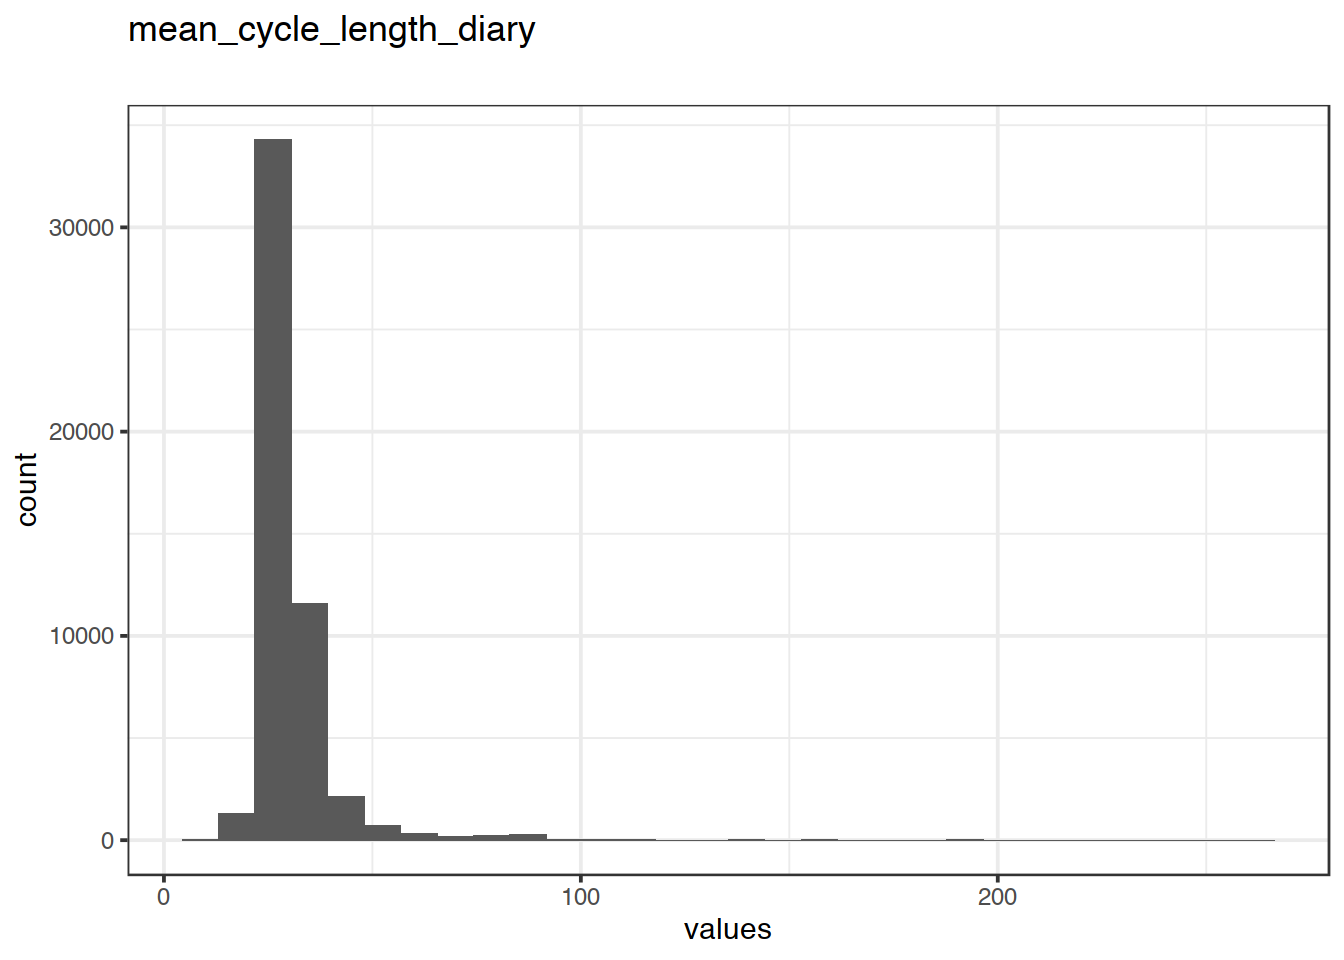 Distribution of values for mean_cycle_length_diary